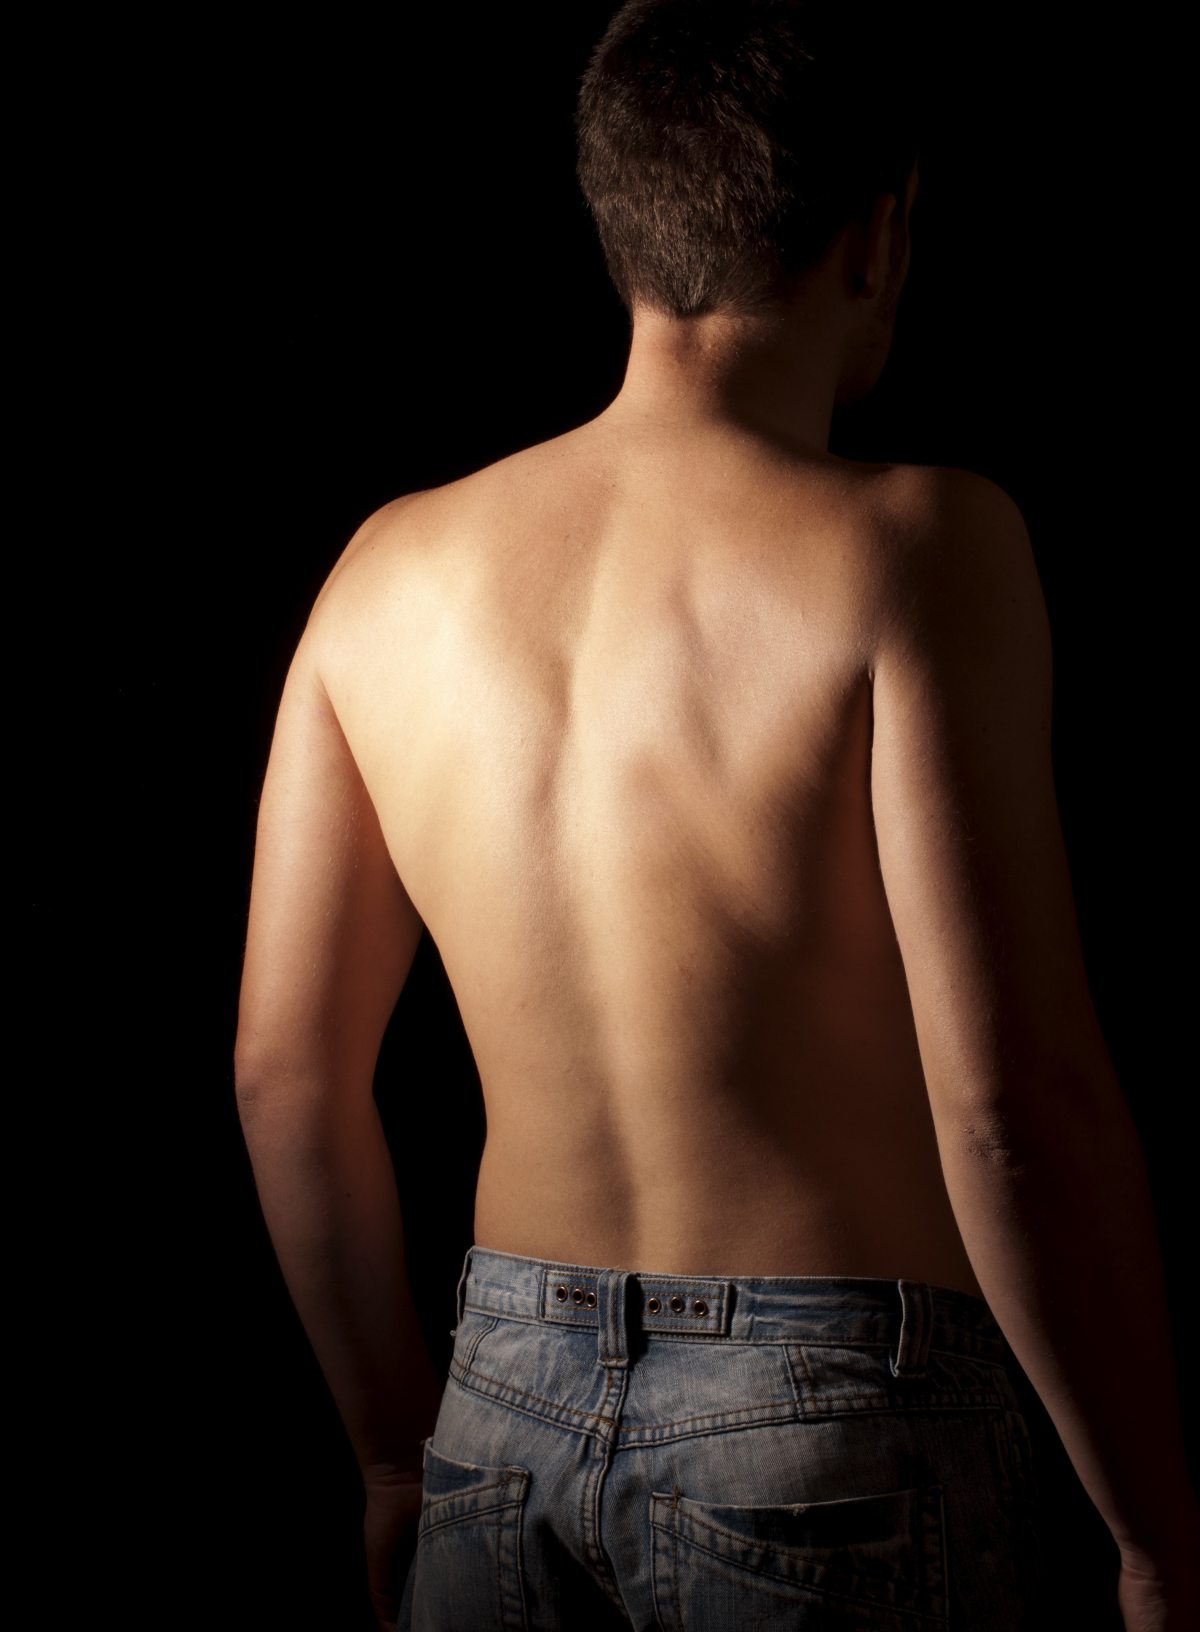 Four Steps To Fix Your Posture